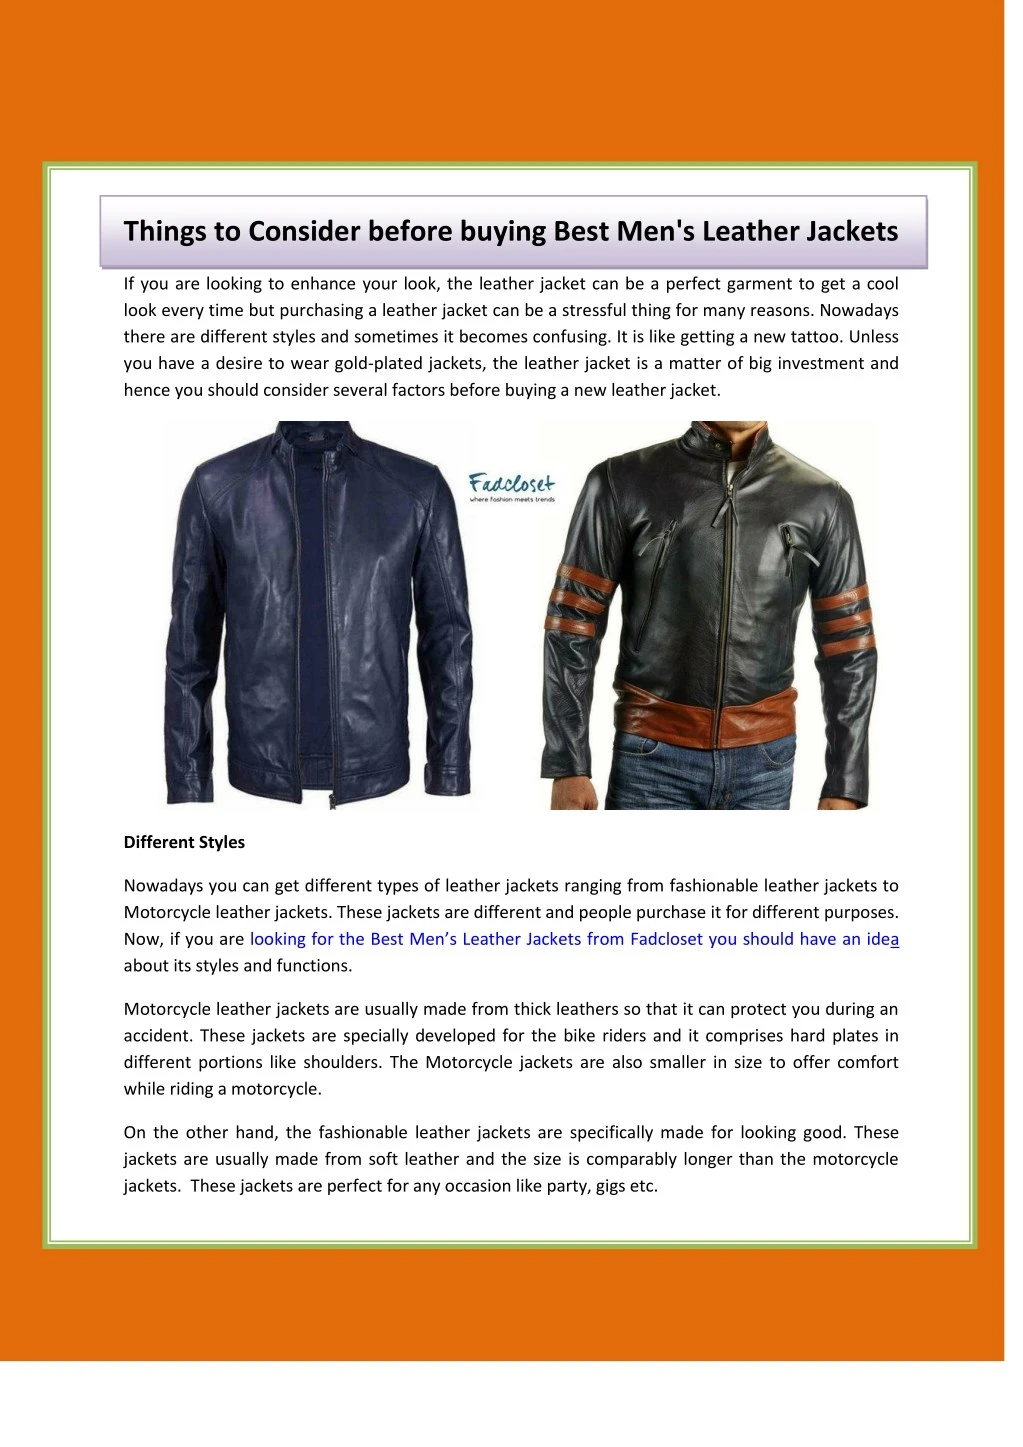 PPT - Things to Consider before buying Best Men's Leather Jackets  PowerPoint Presentation - ID:7956164